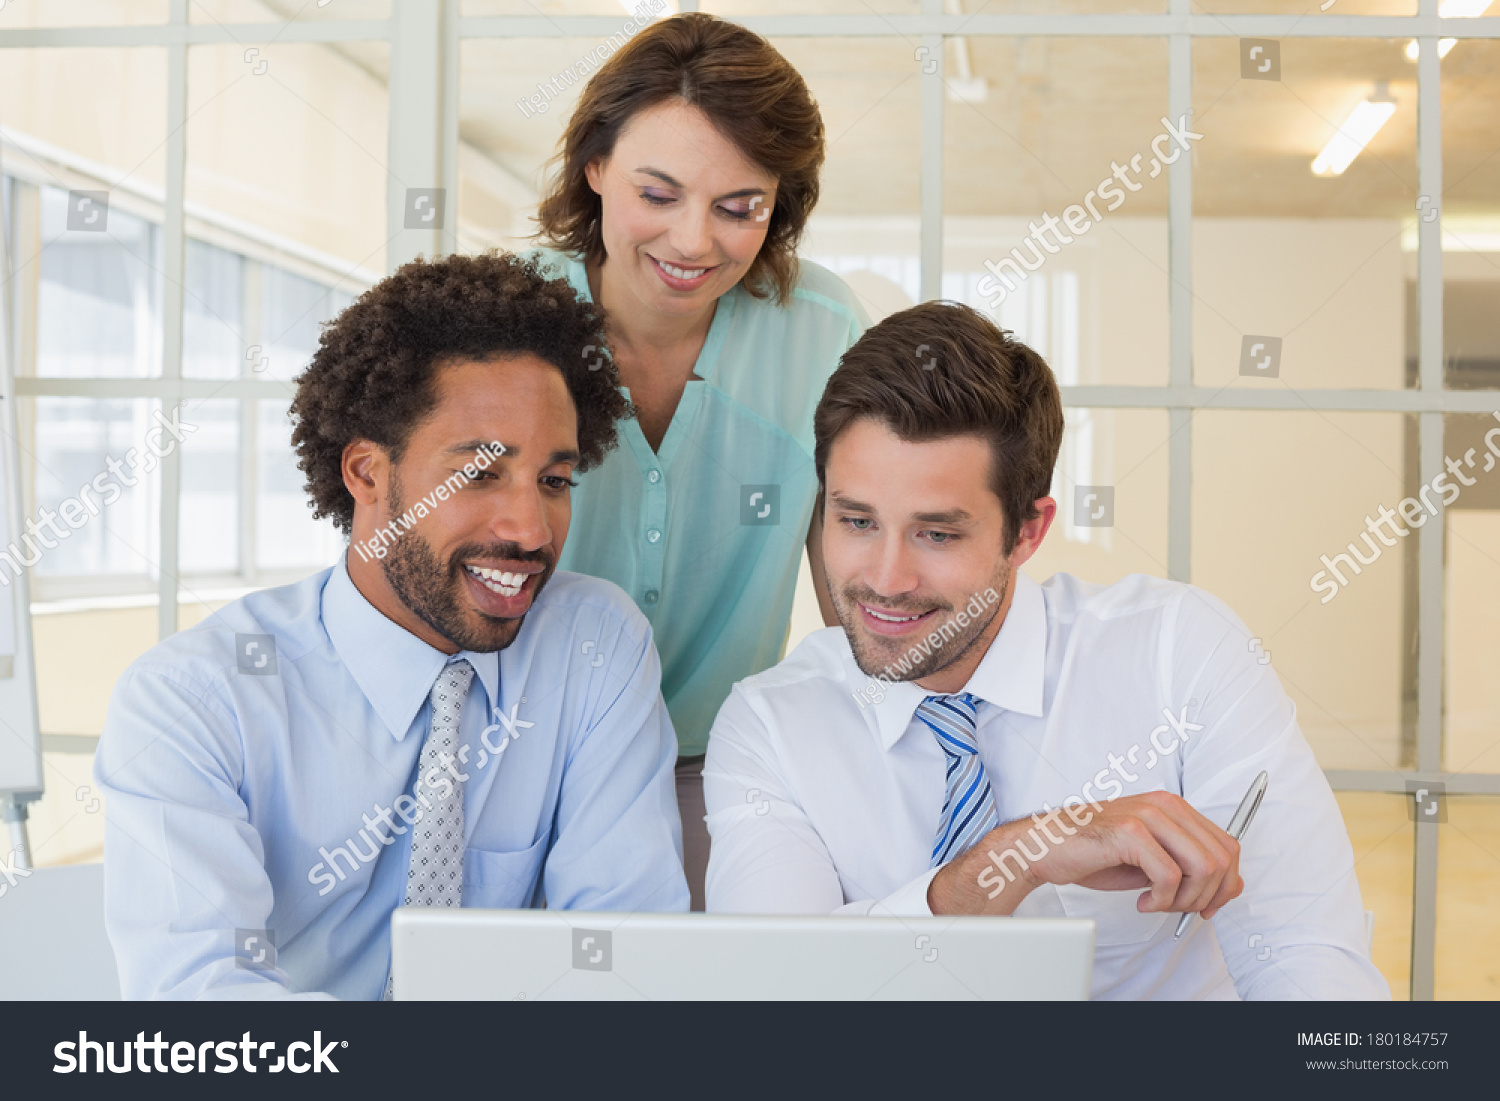 Three smiling young business people using laptop together at office #180184757